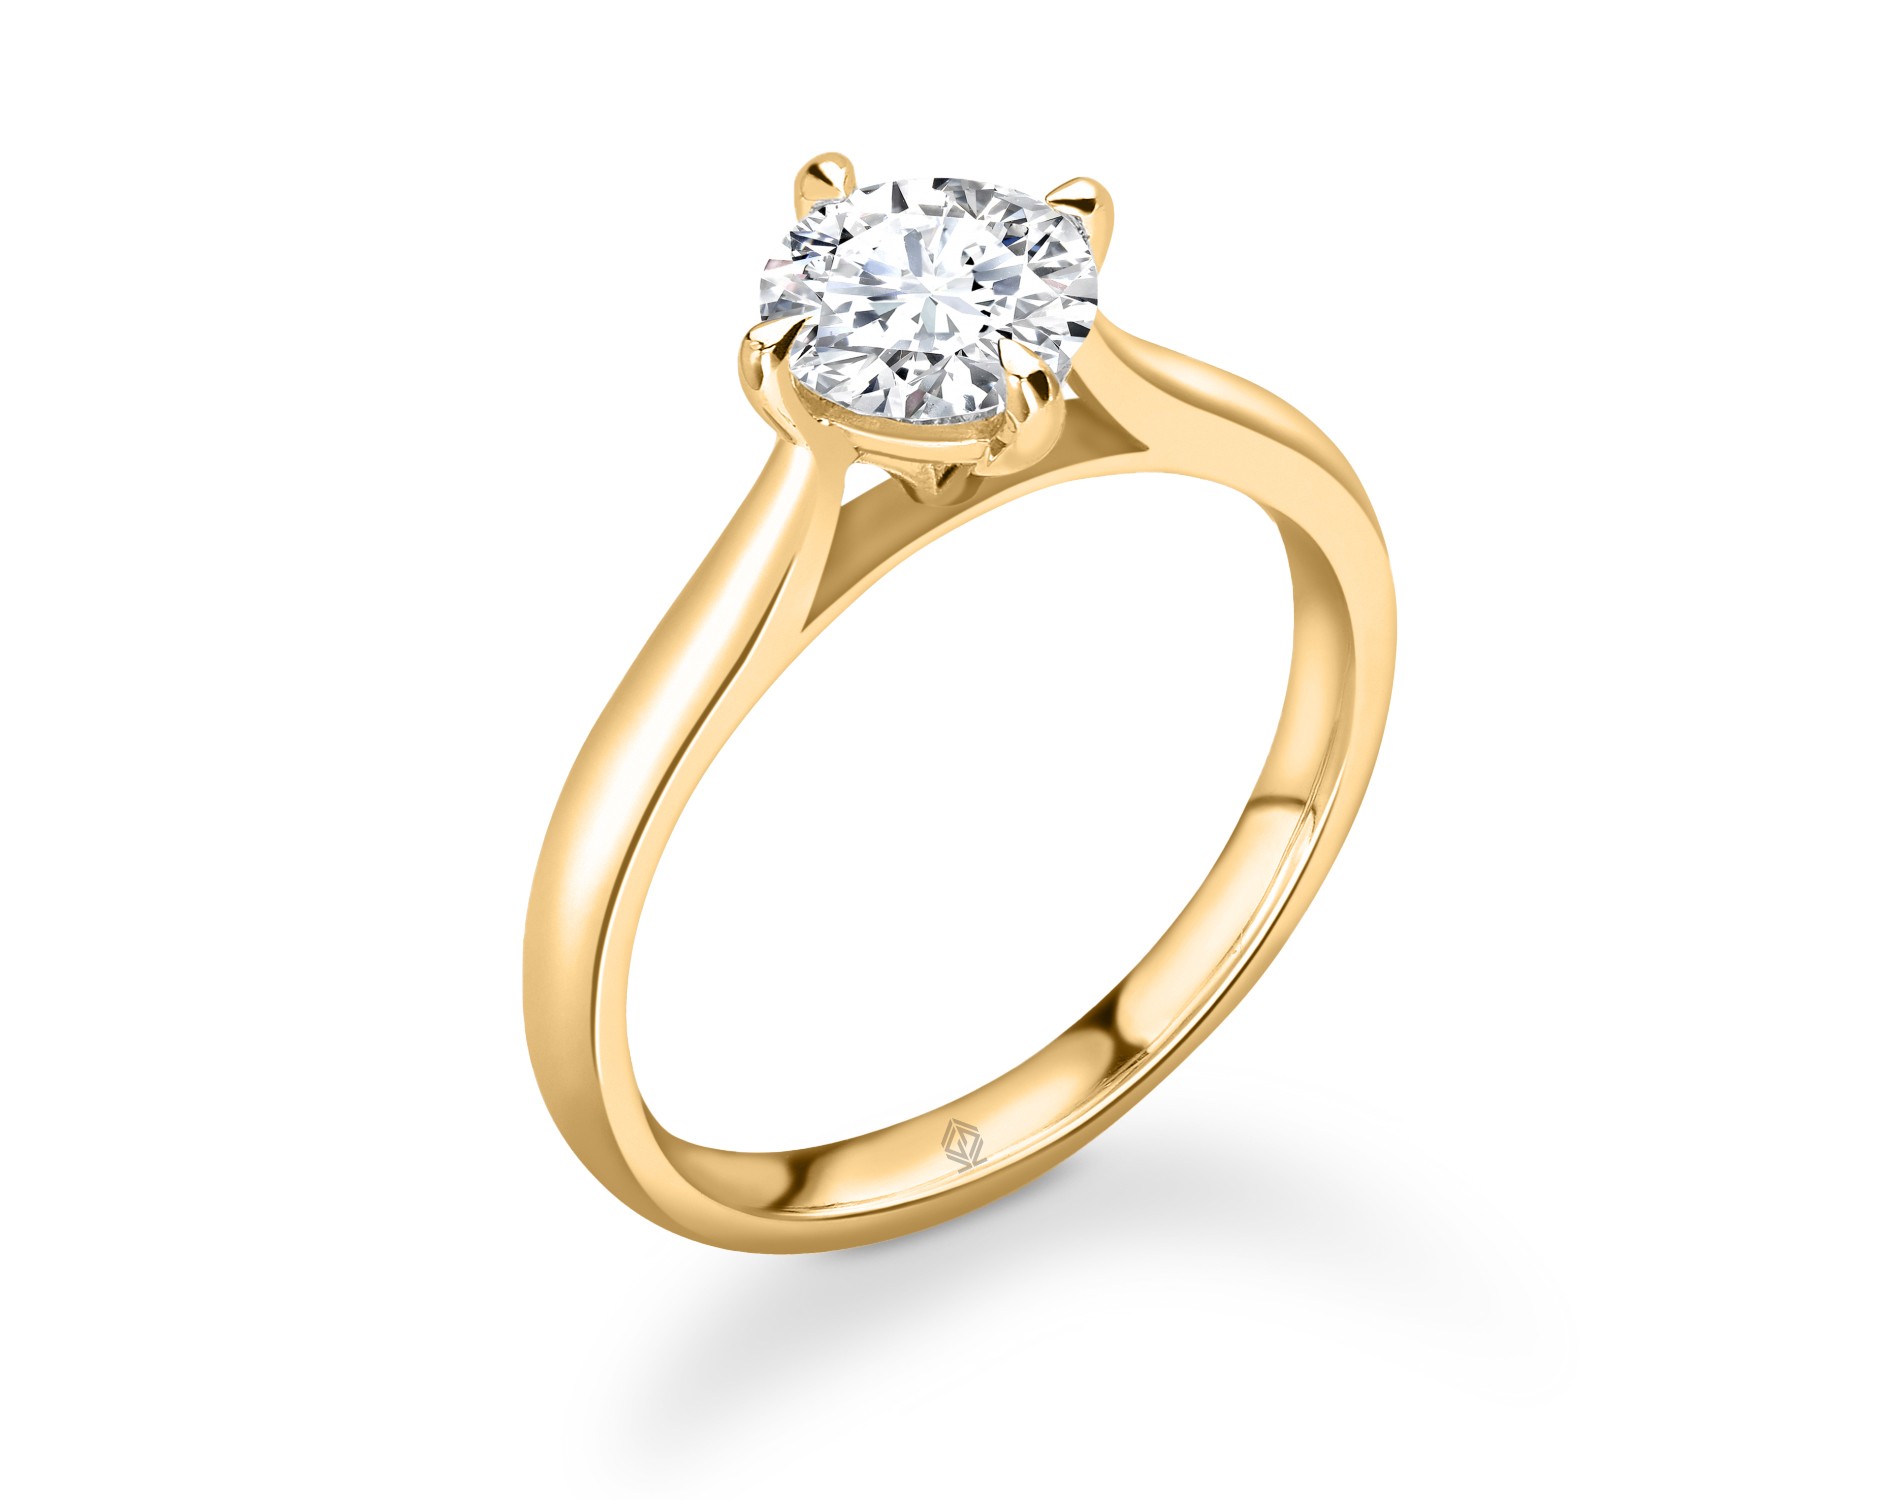 18K YELLOW GOLD ROUND CUT 4 PRONGS SOLITAIRE DIAMOND ENGAGEMENT RING